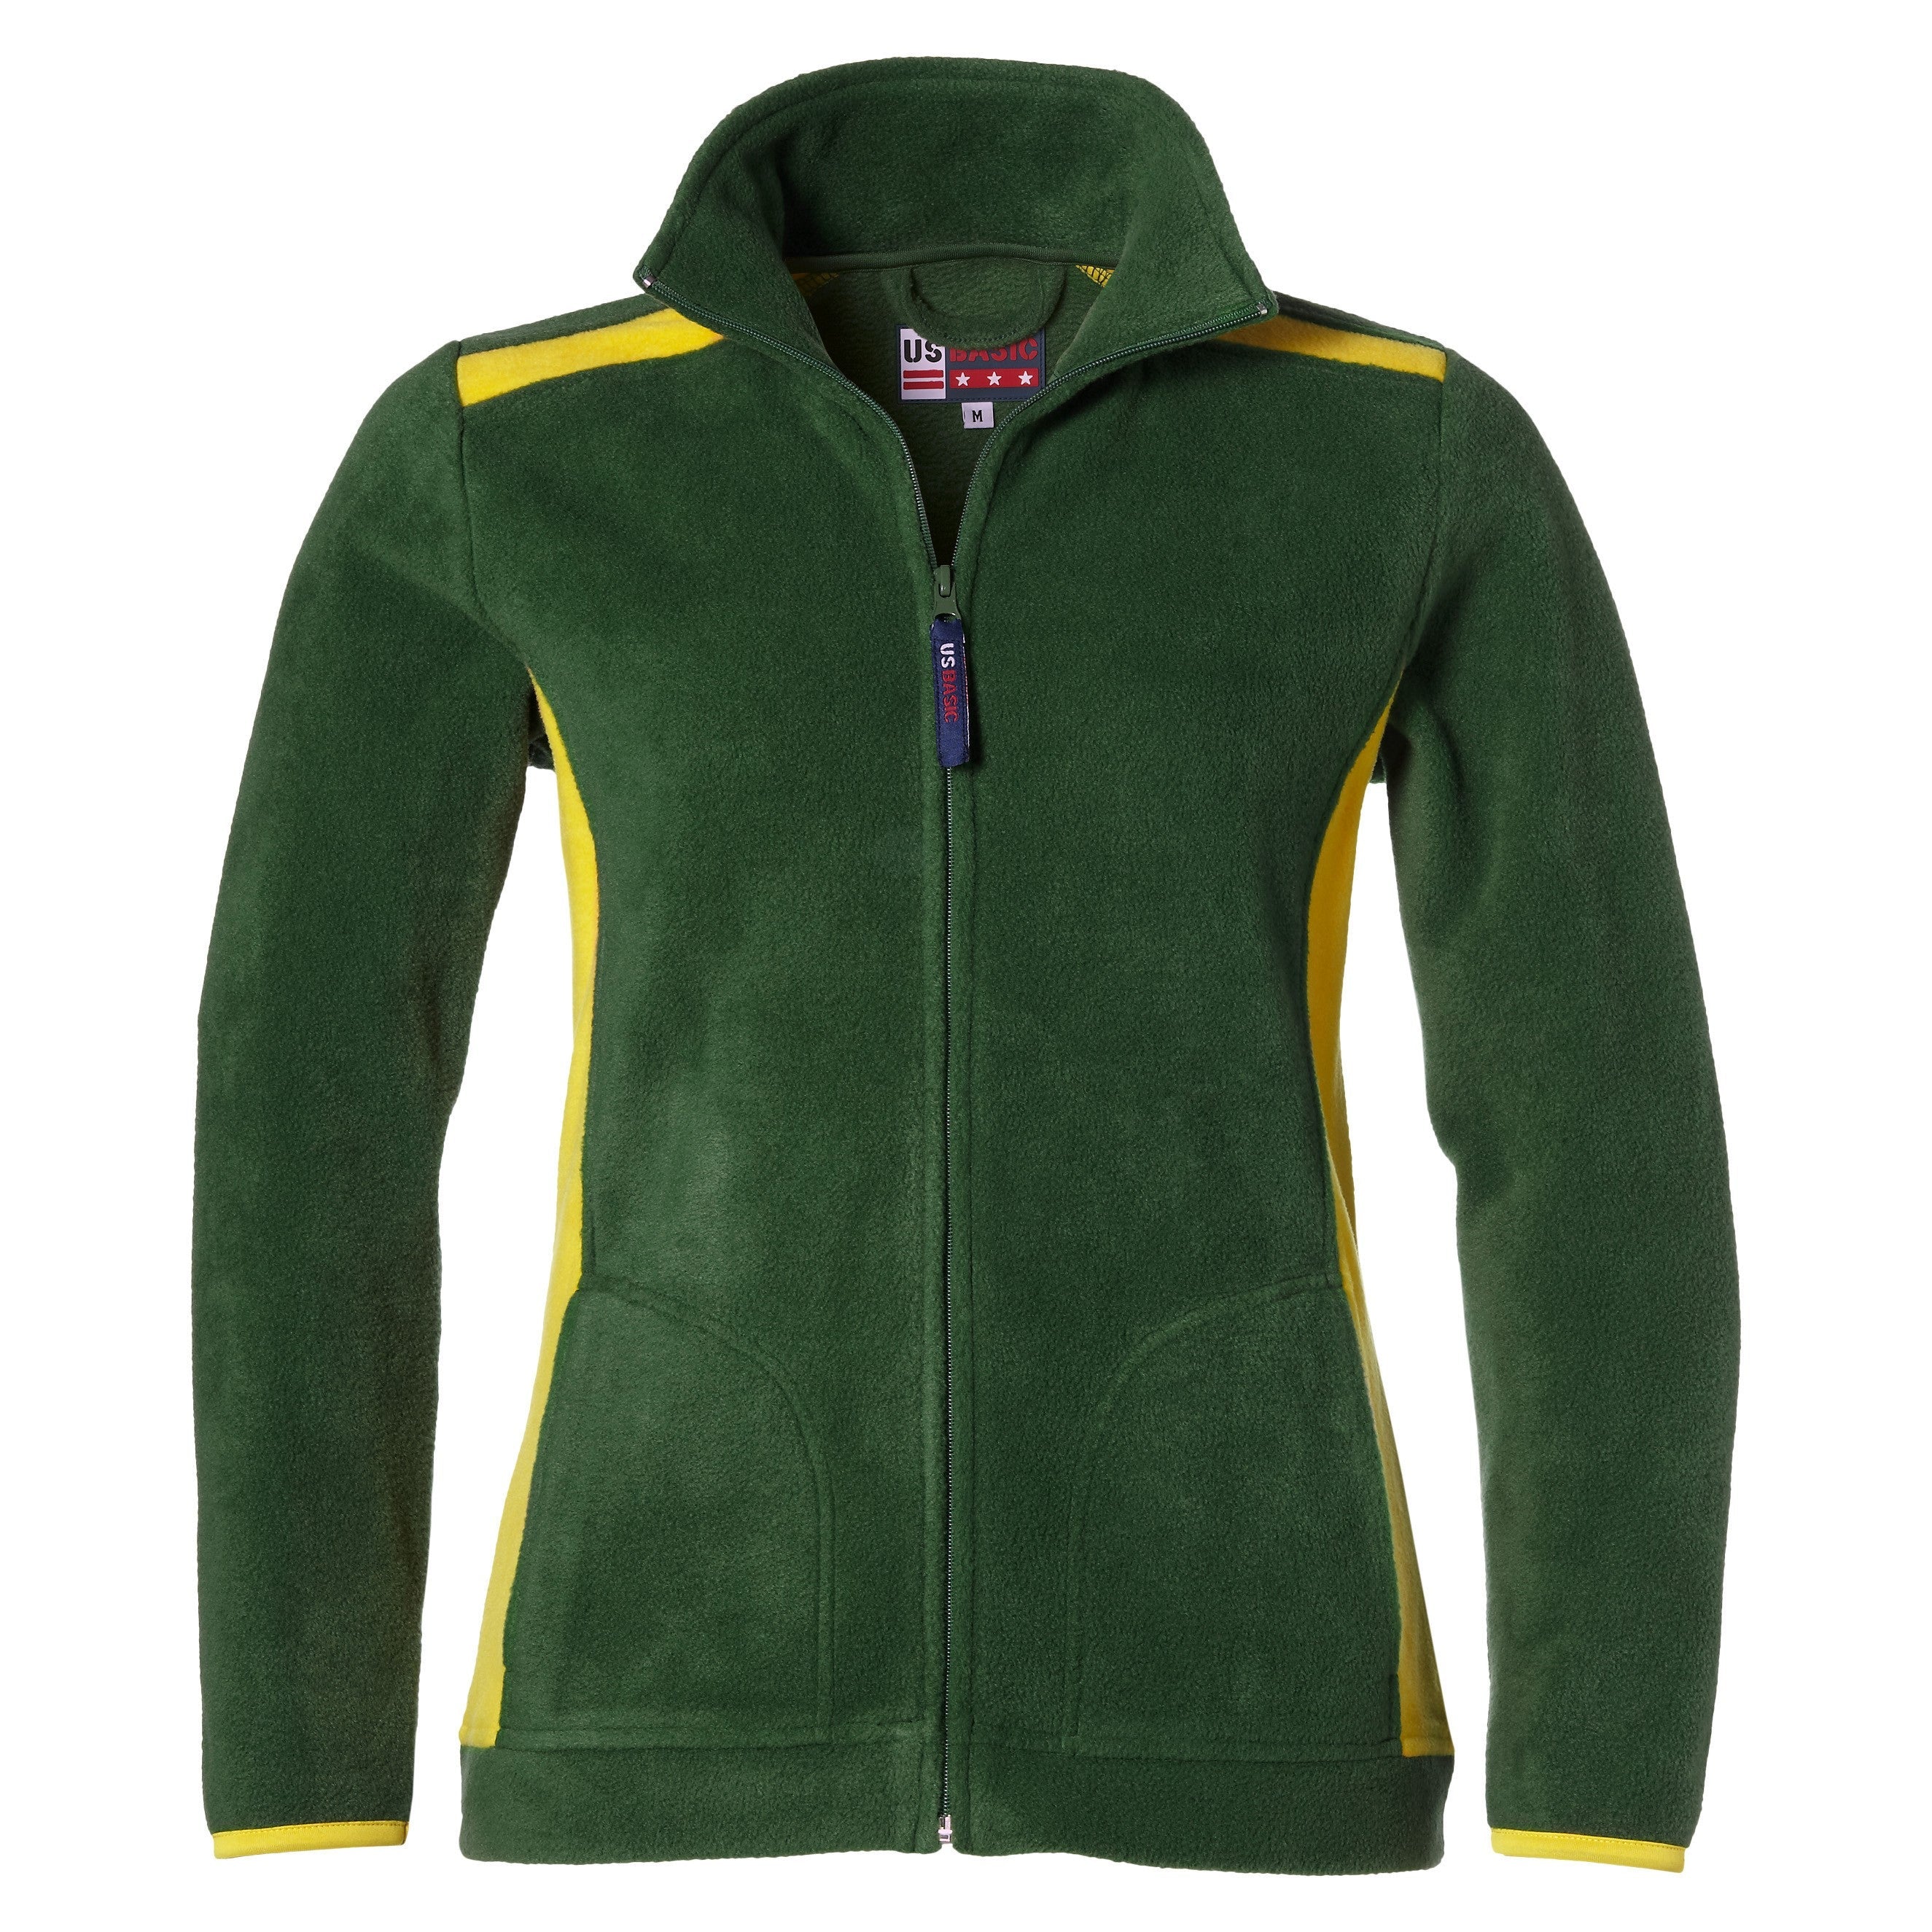 Ladies Brighton Fleece Jacket - Green Gold Only-L-Green and Gold-GG